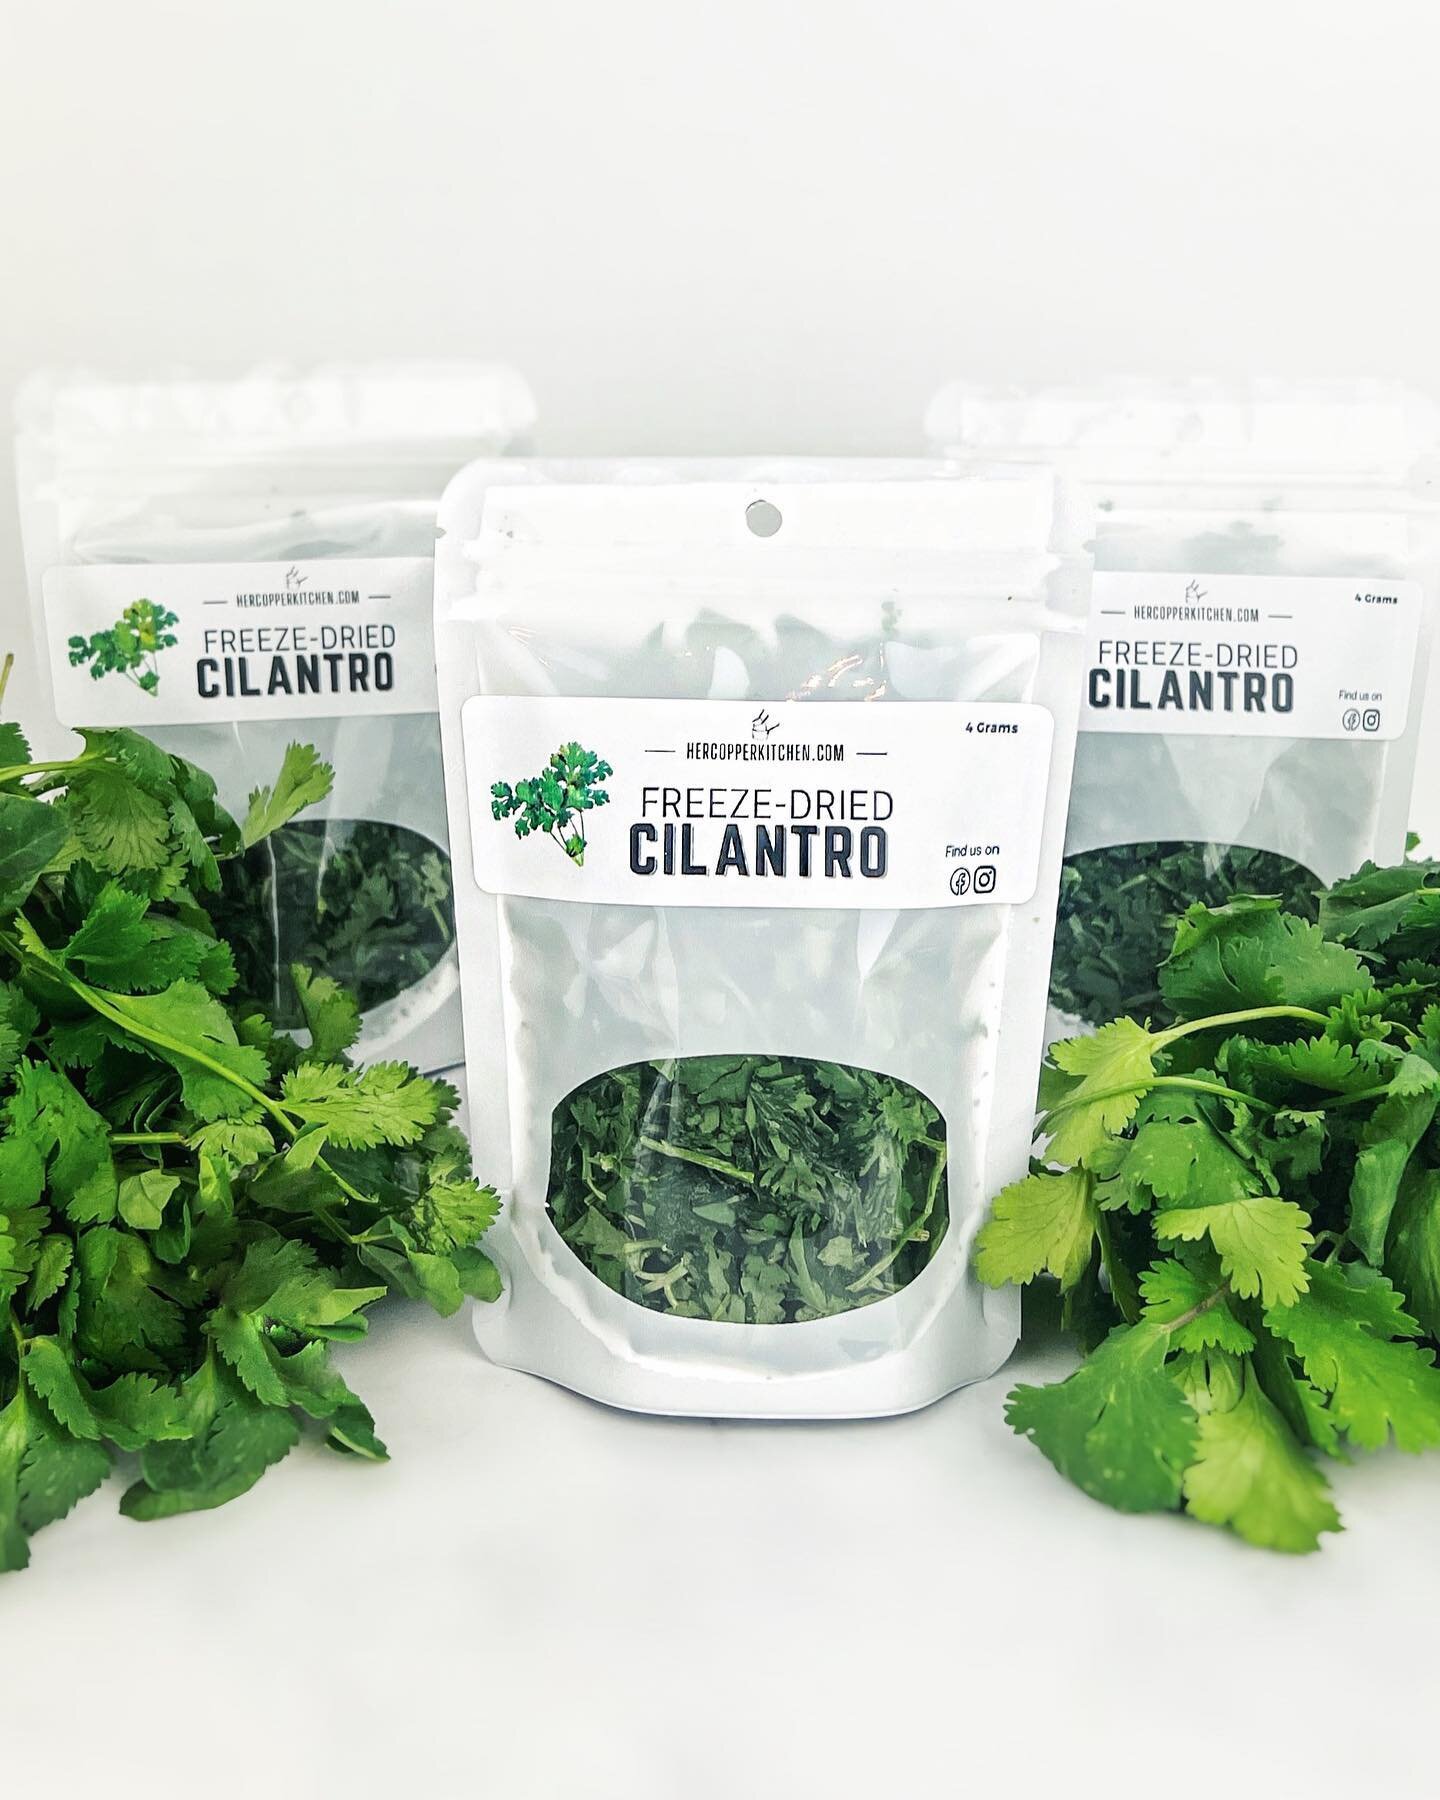 NEW PRODUCT: FREEZE DRIED CILANTRO
Add our Freeze Dried Cilantro to your recipes for a punch of bright flavour.  We include the tender upper portion of the stems along with the leaves, as they offer just as much flavor as the foliage.
When cooking wi